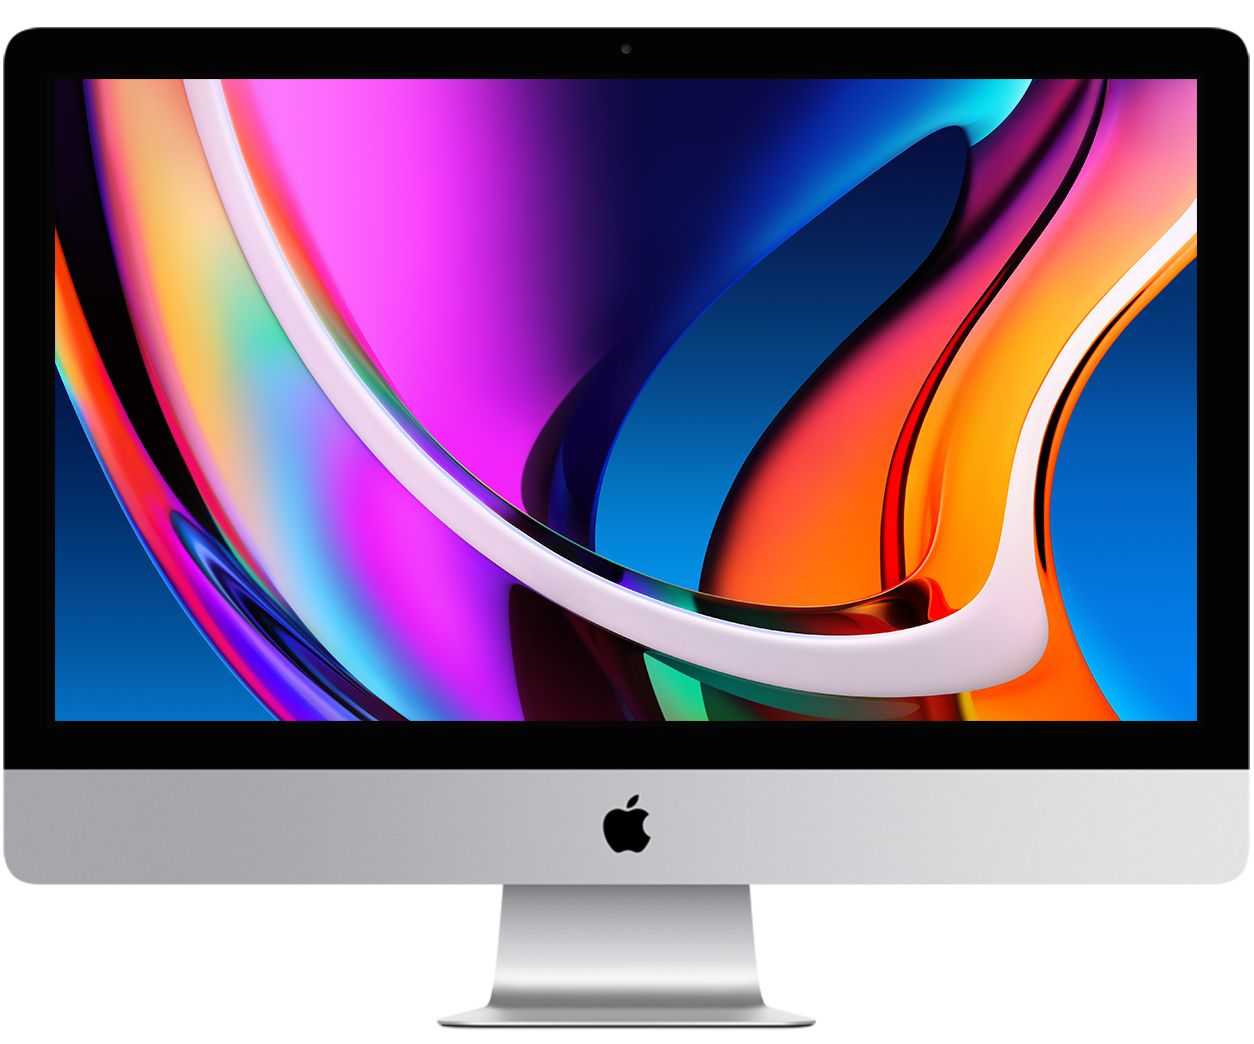 27-inch iMac 2020 Price Online in Lagos Nigeria. Buy 27-inch iMac with 5K Retina Display in Nigeria, Lagos and Abuja